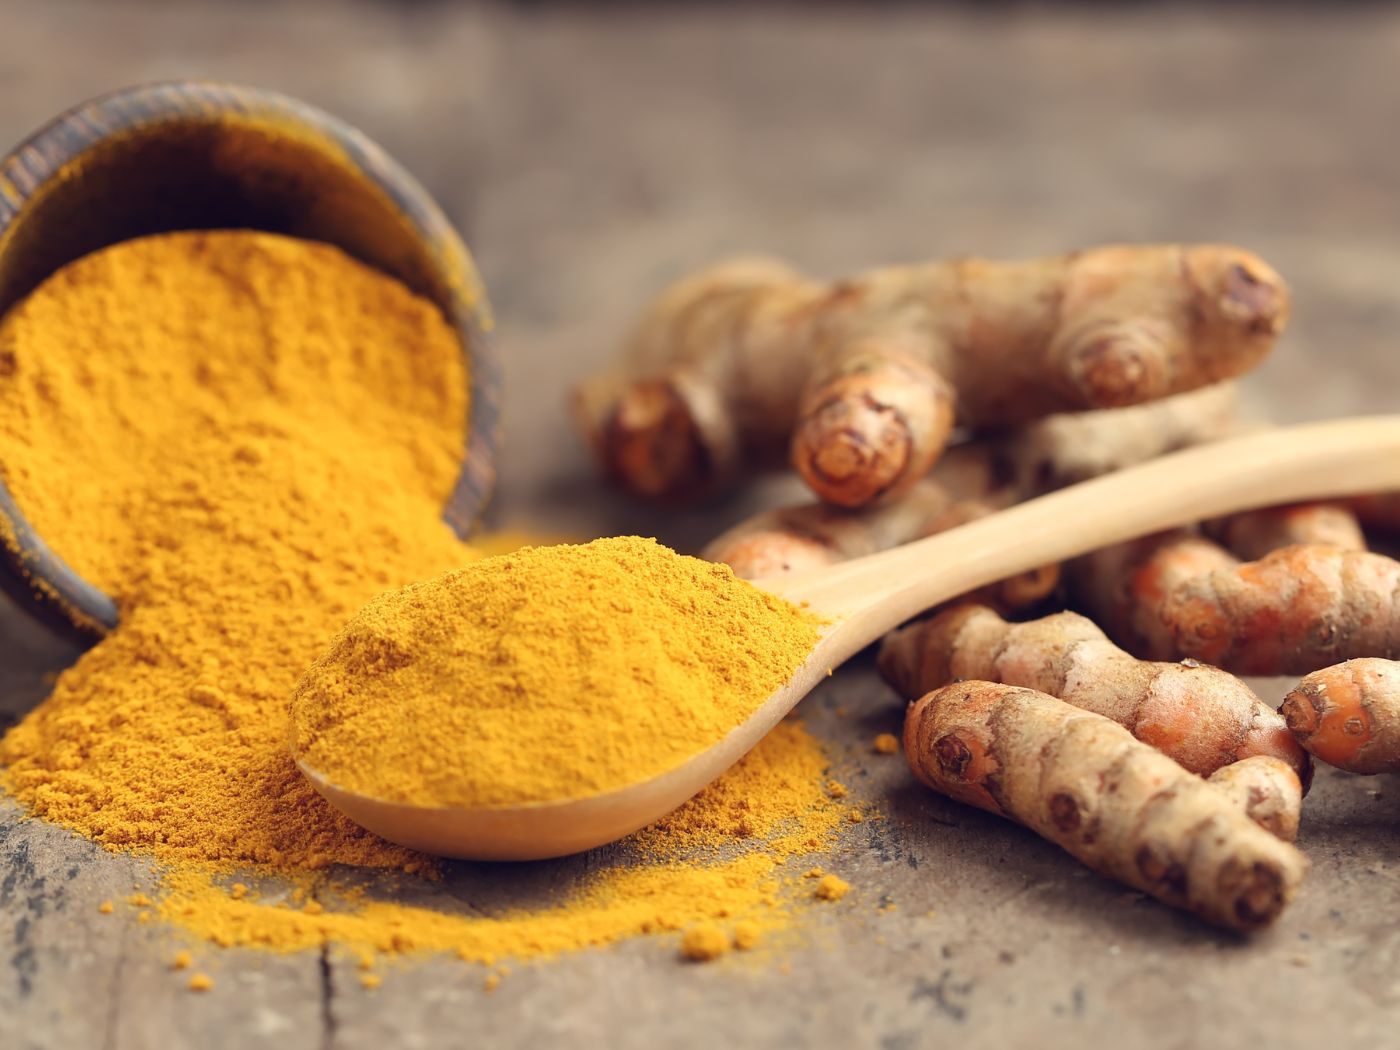 Turmeric Benefits - Why it Should be a Part of Your Diet